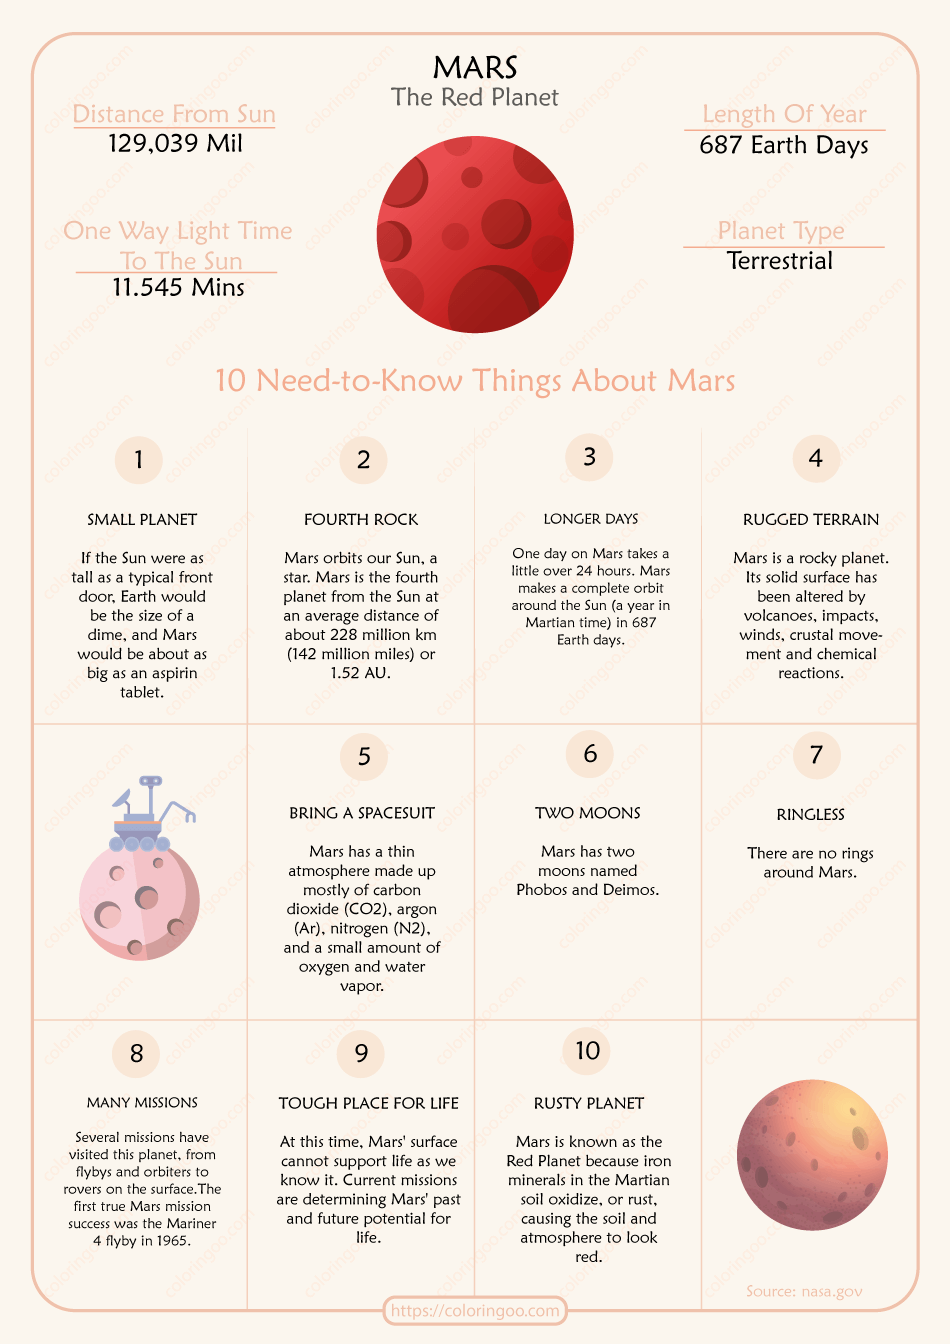 10 need to know things about mars worksheet